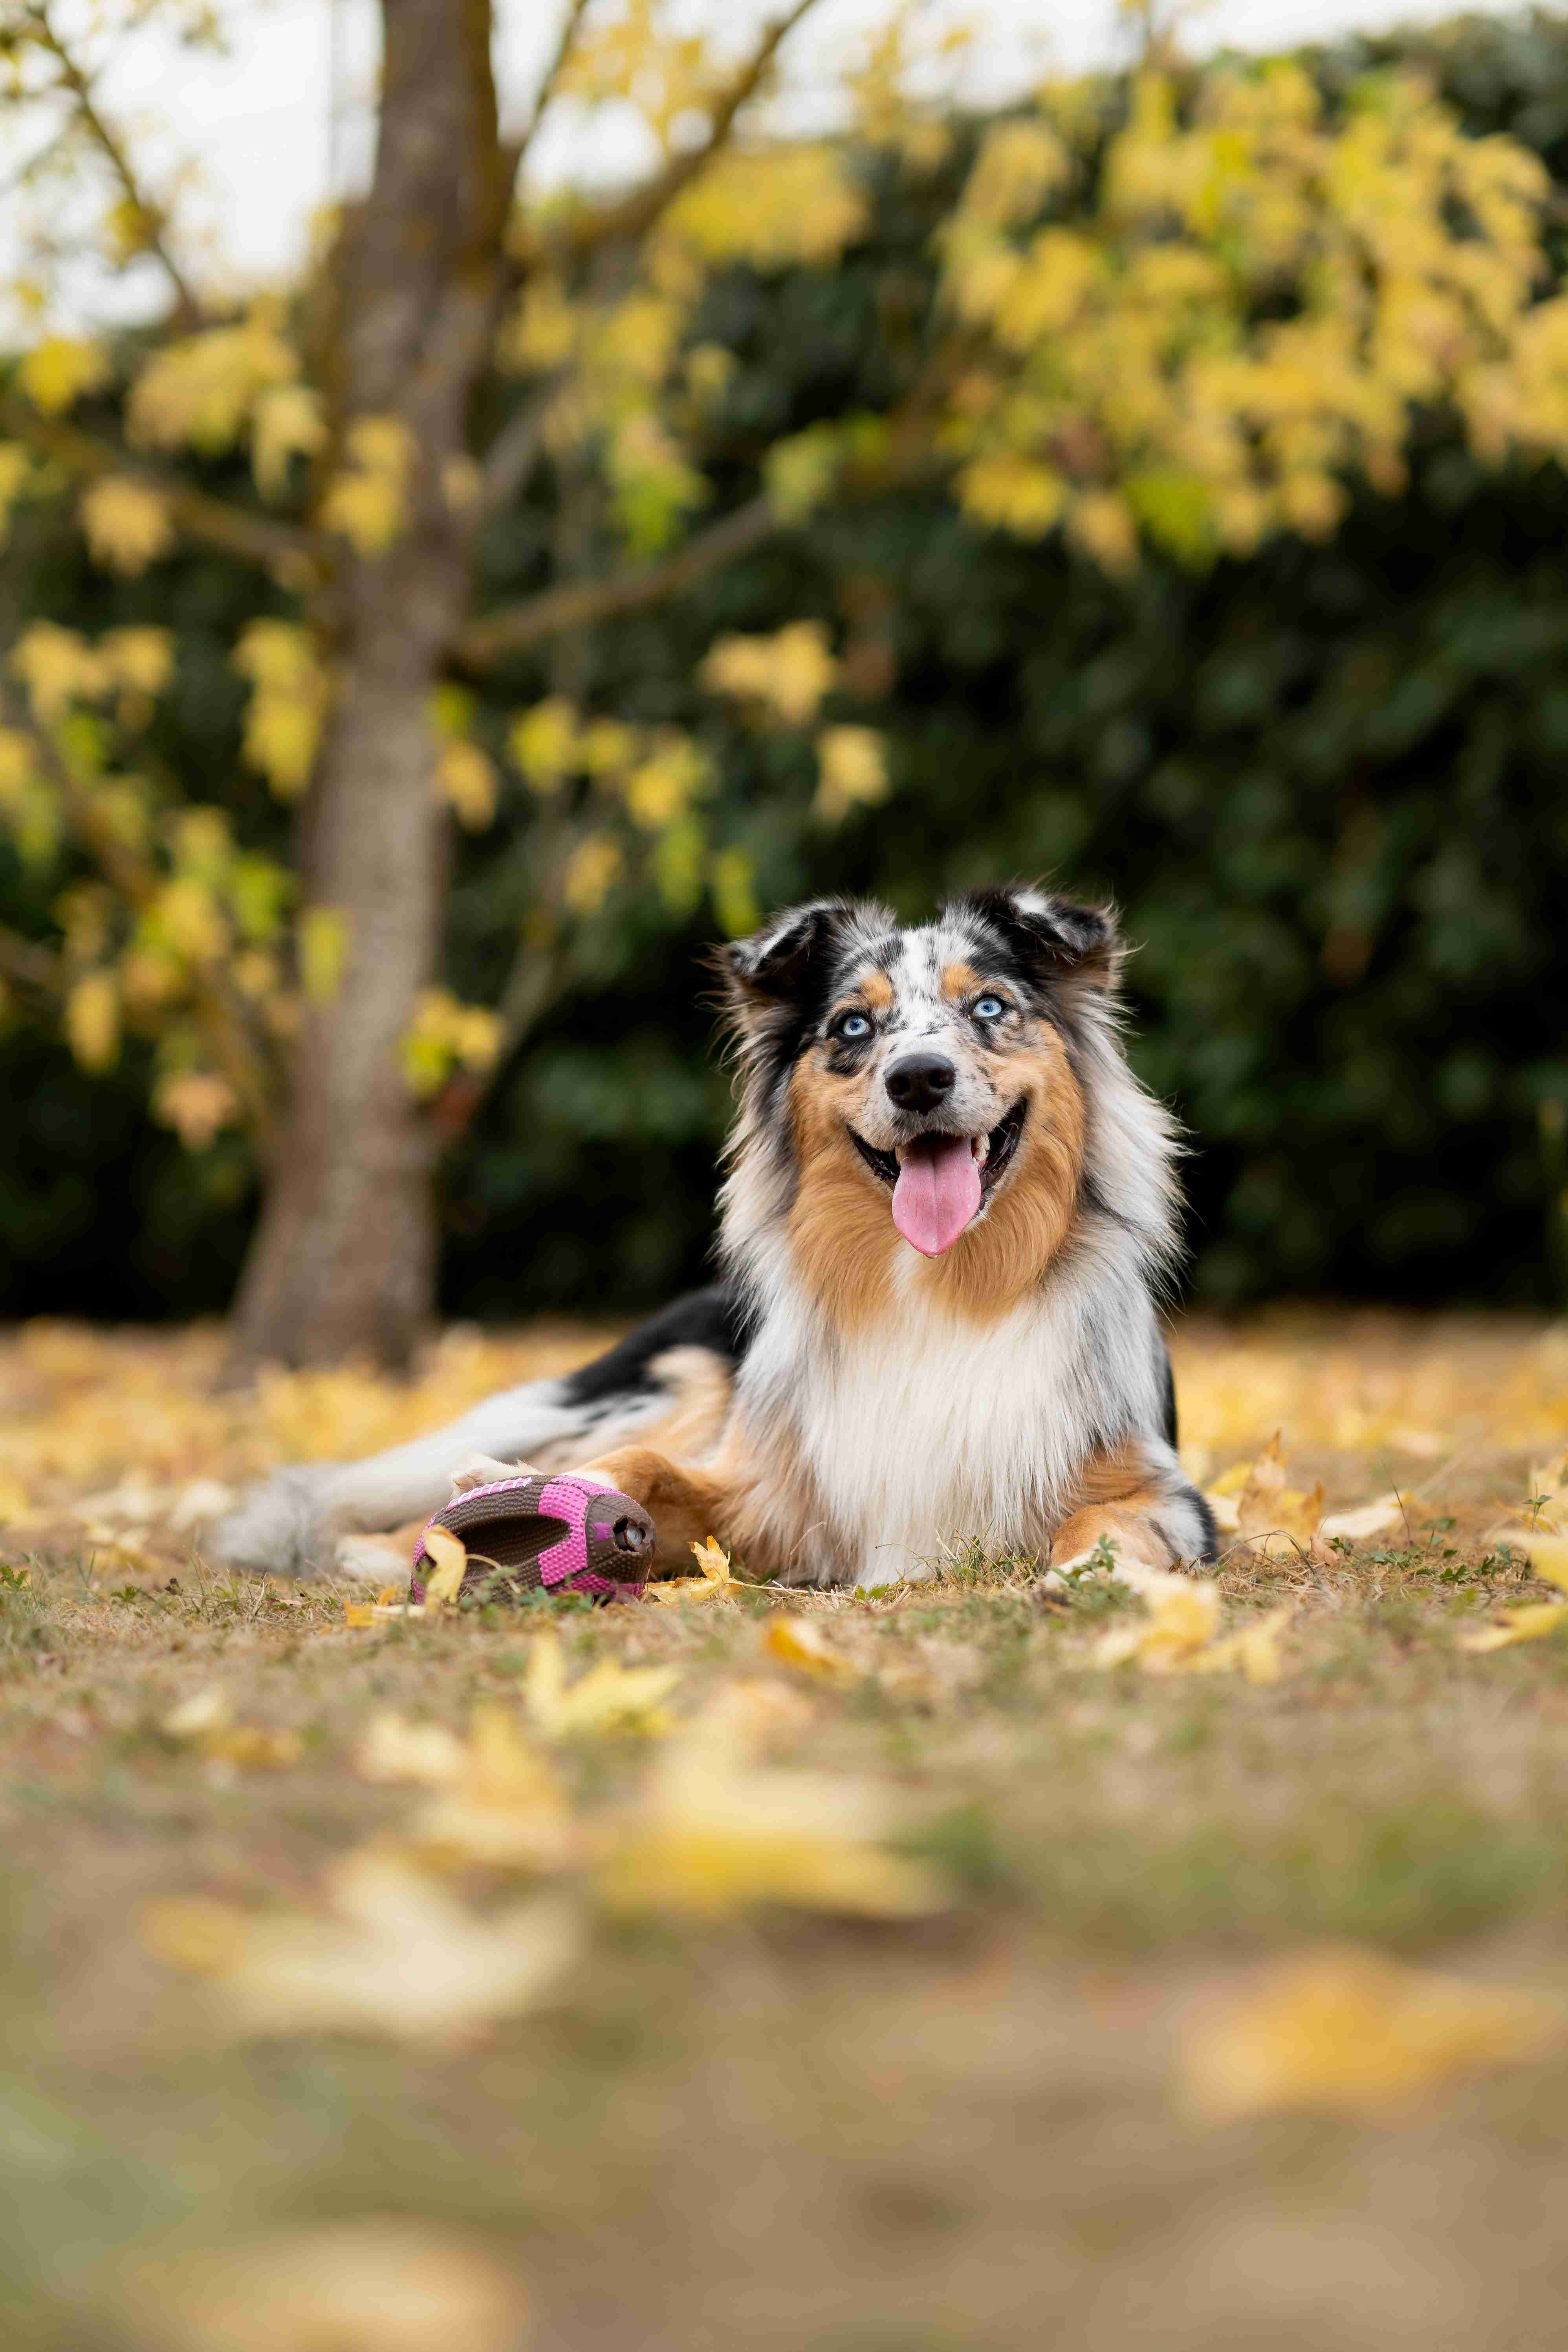 Mastering Agility Training: Tips and Tricks for Teaching Your Border Collie